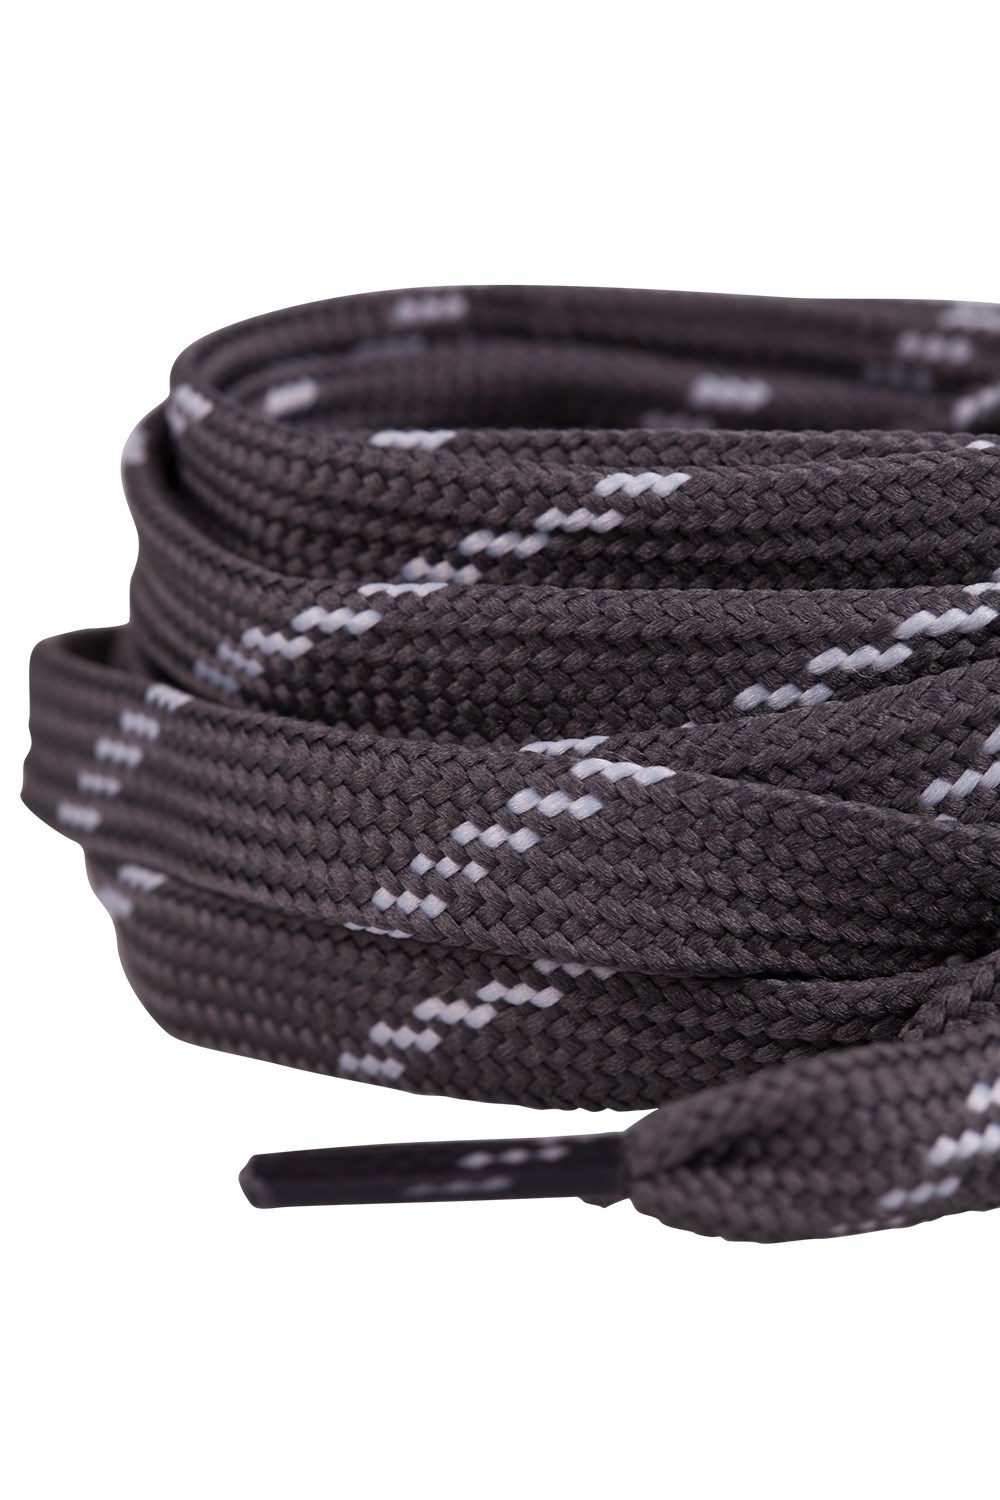 Mountain Warehouse Fleck Boot Laces in Light Grey with Plastic Aglets-One Size 